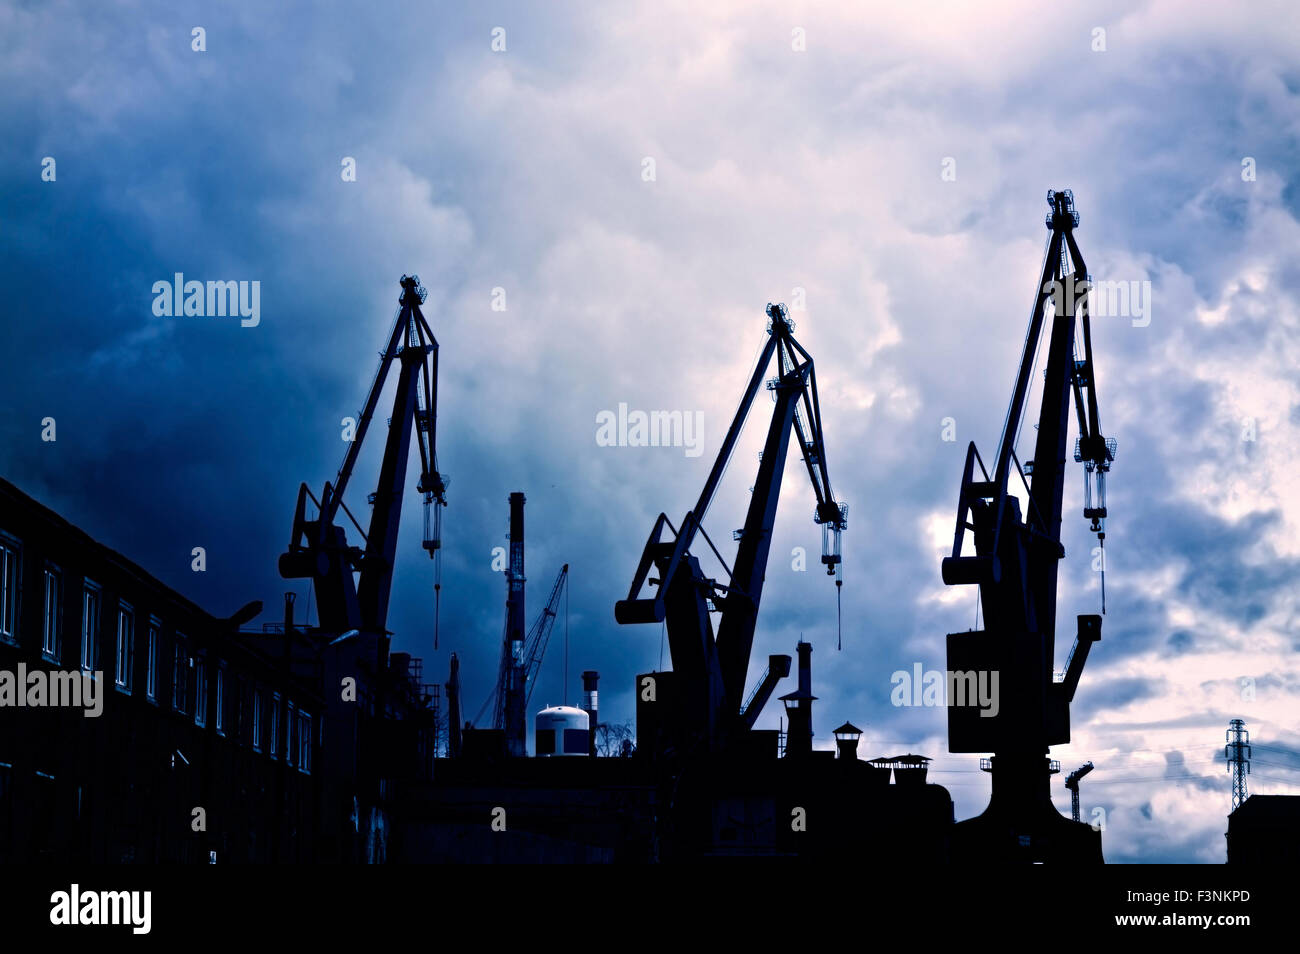 Industrial conceptual image. Dark and sullen clouds over industrial shipyard area with cranes. Stock Photo